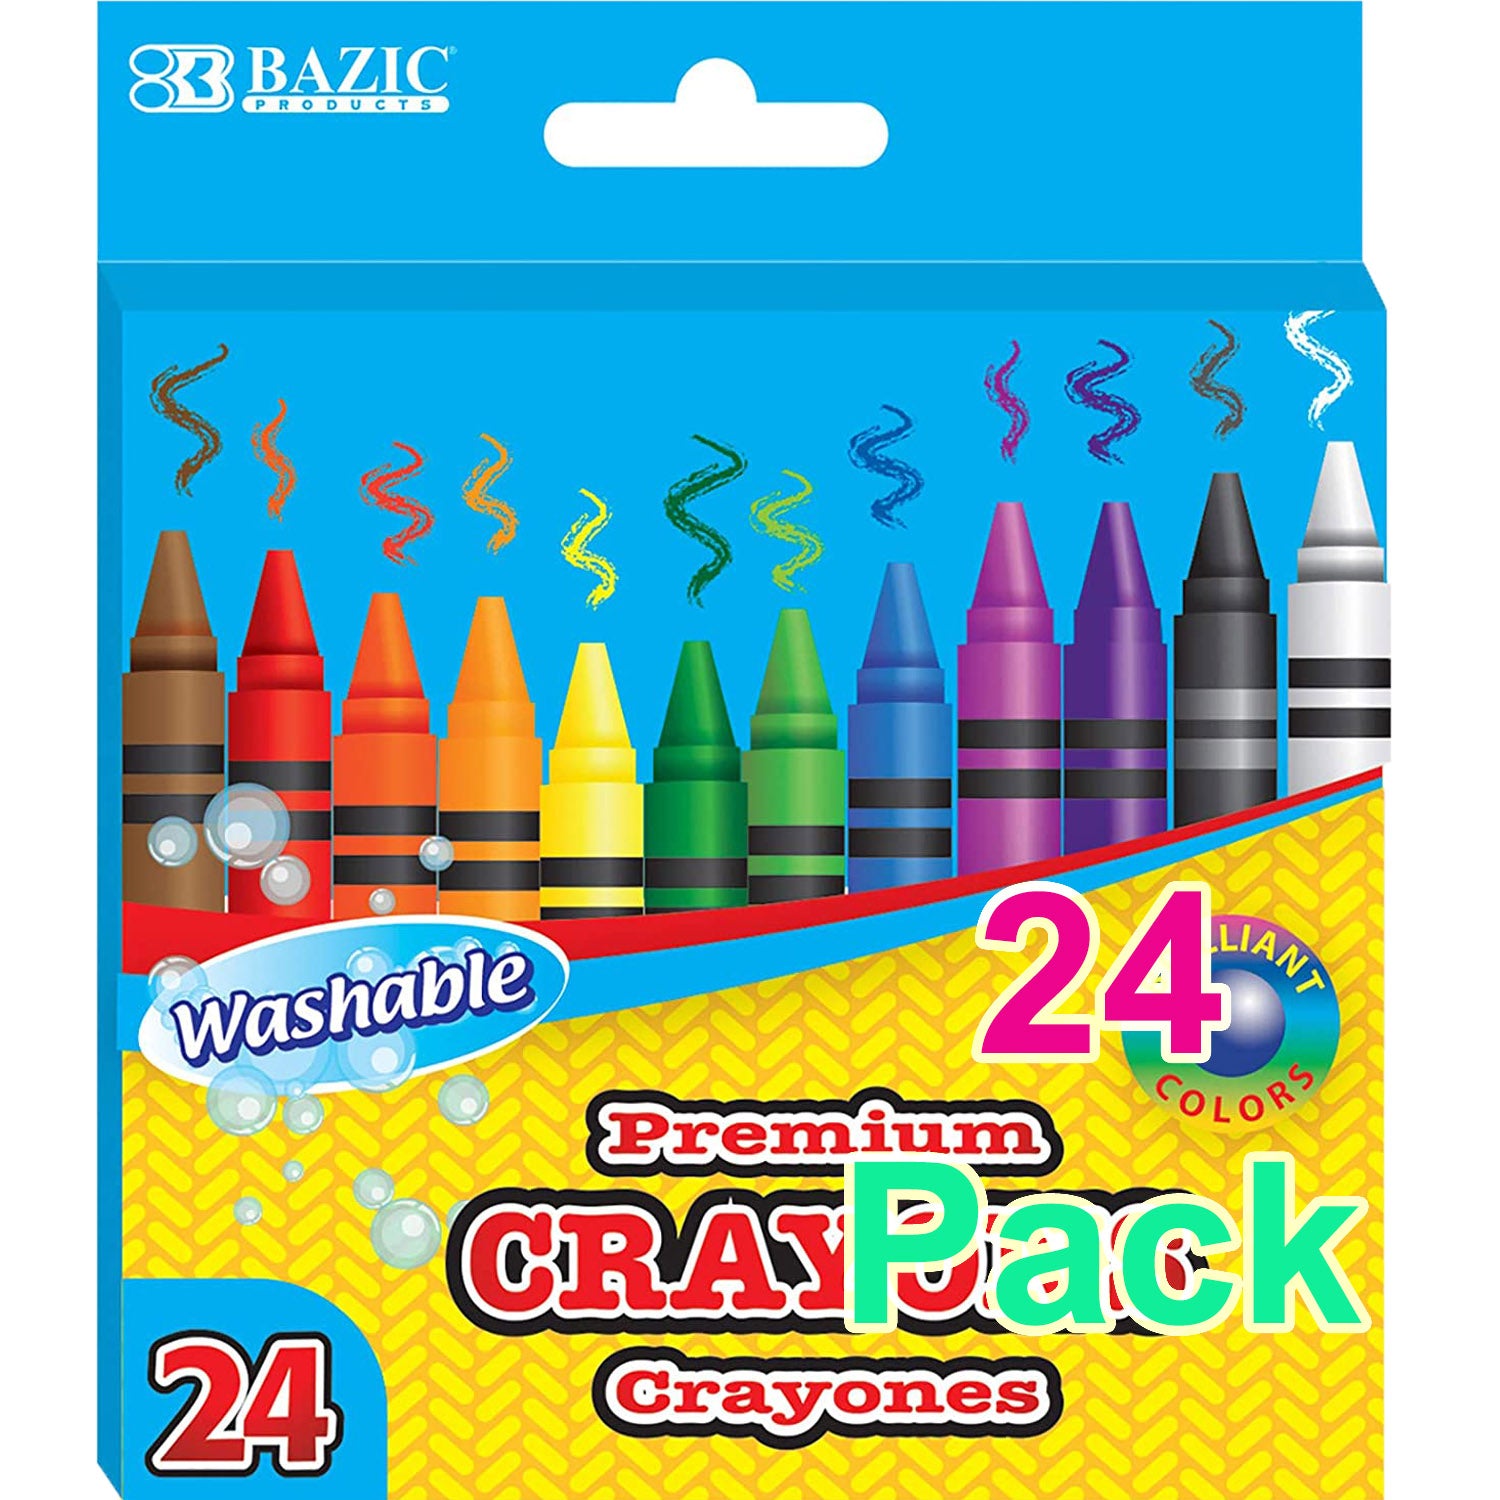 Premium Crayons Coloring Set, Assorted Colors Washable | 24-Count